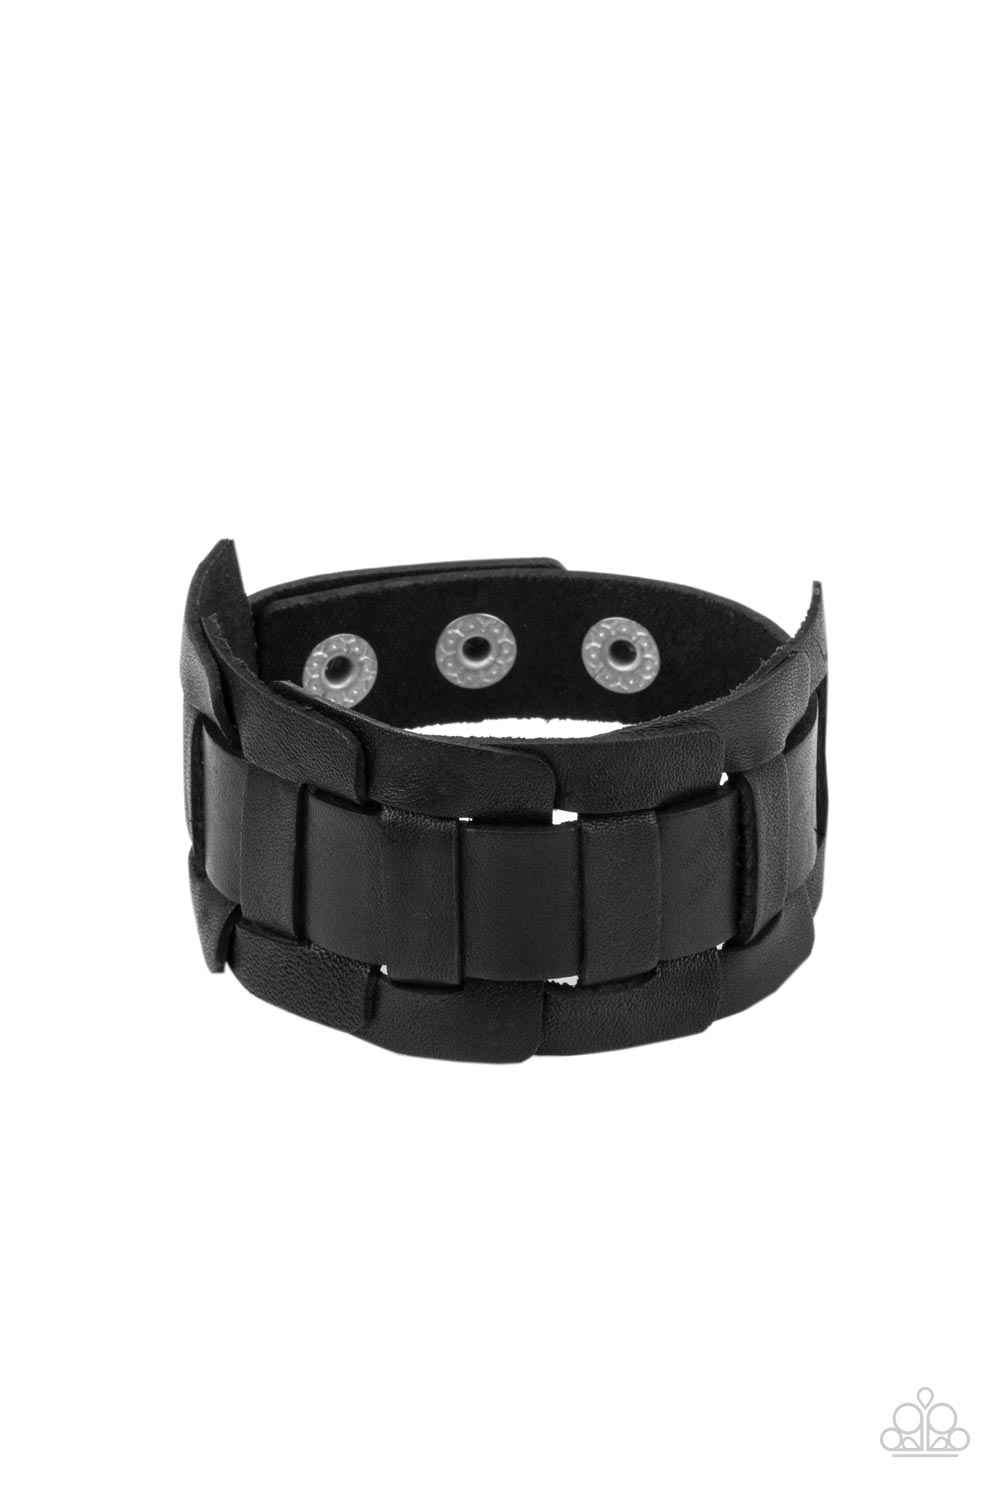 Plainly Plaited - Black Leather Bracelet - Paparazzi Accessories - A black leather band is threaded through the center of interlocking square leather links, creating a plaited pattern around the wrist. Features an adjustable snap closure.